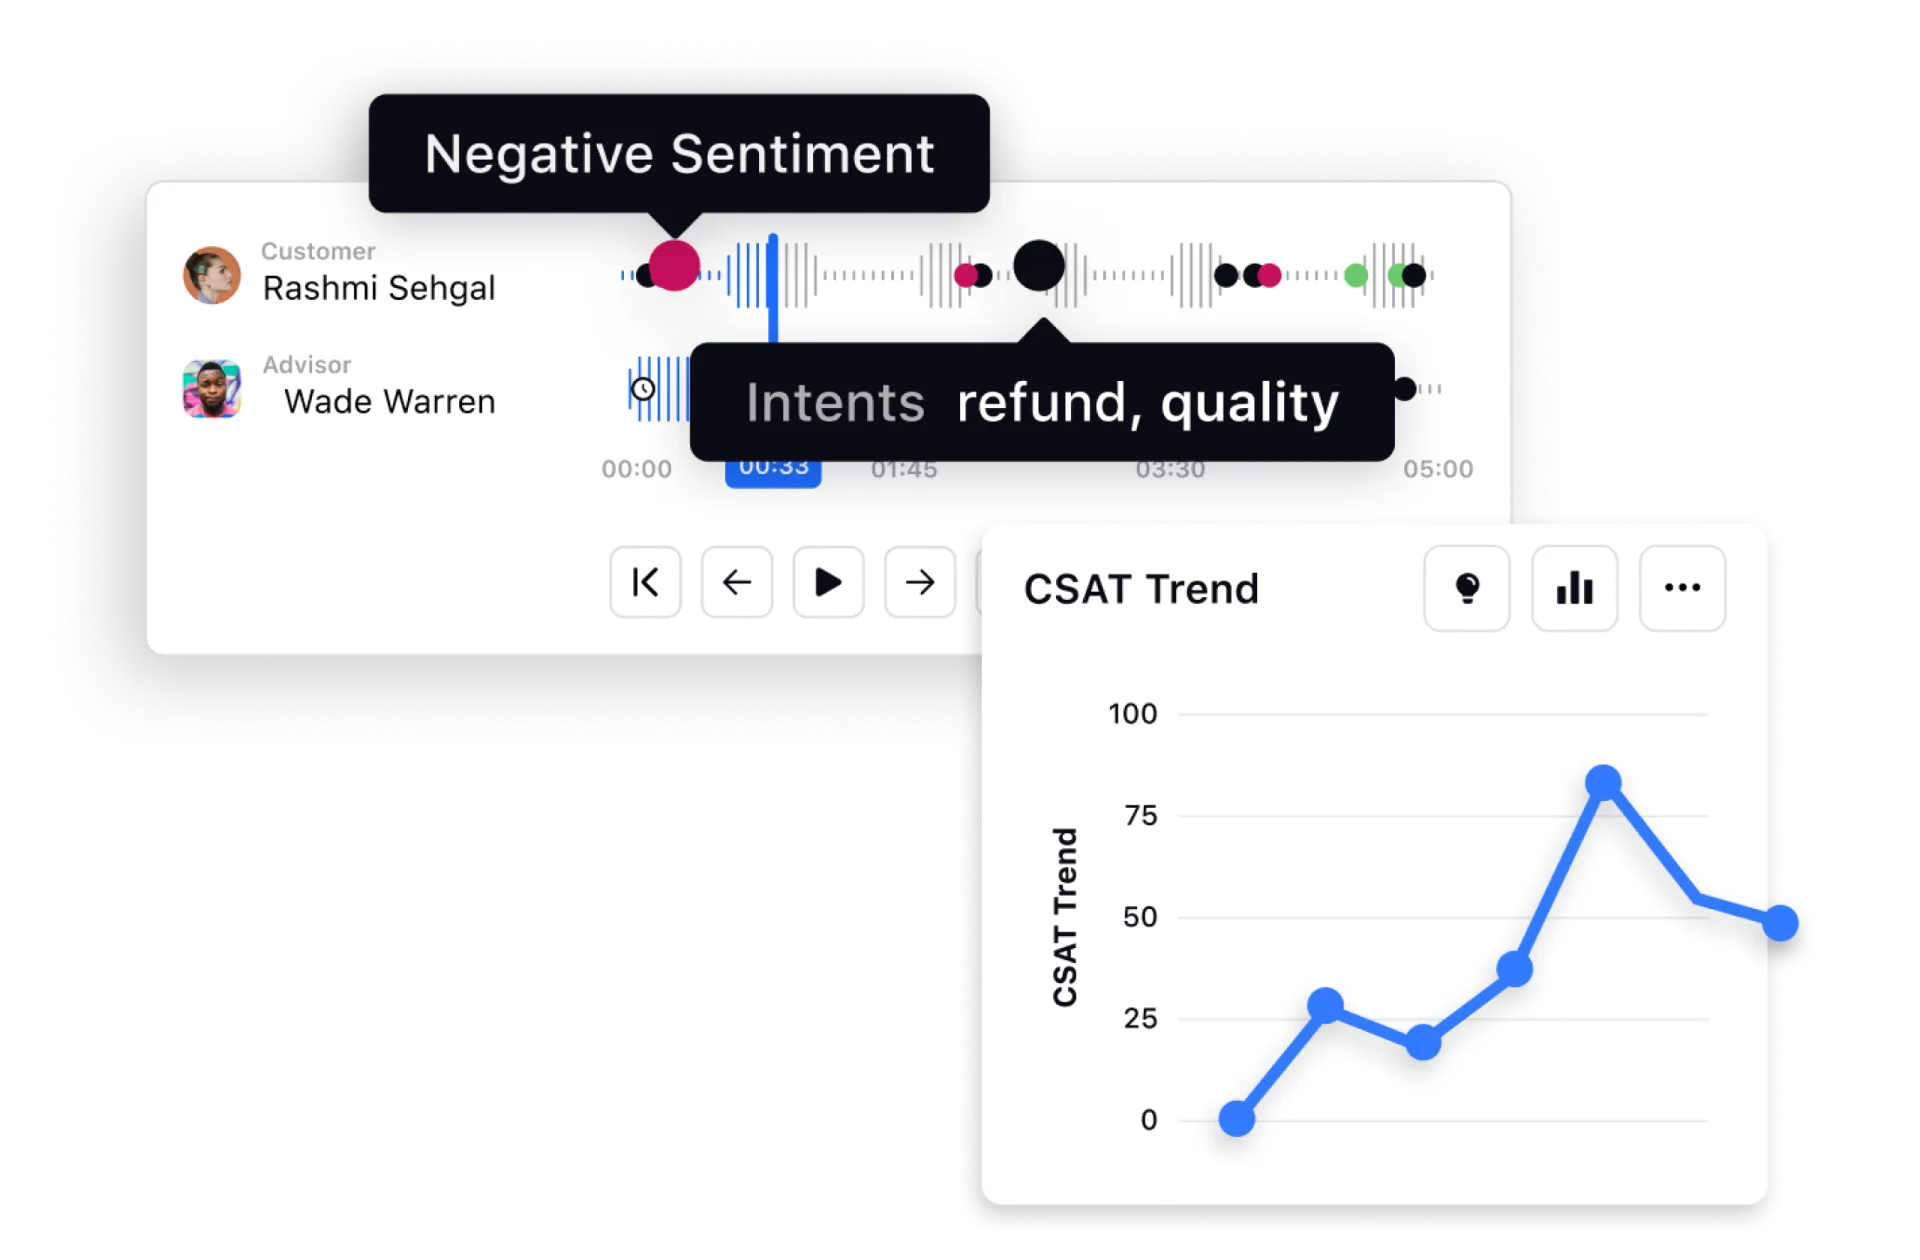 Real-time sentiment and CSAT trend analysis